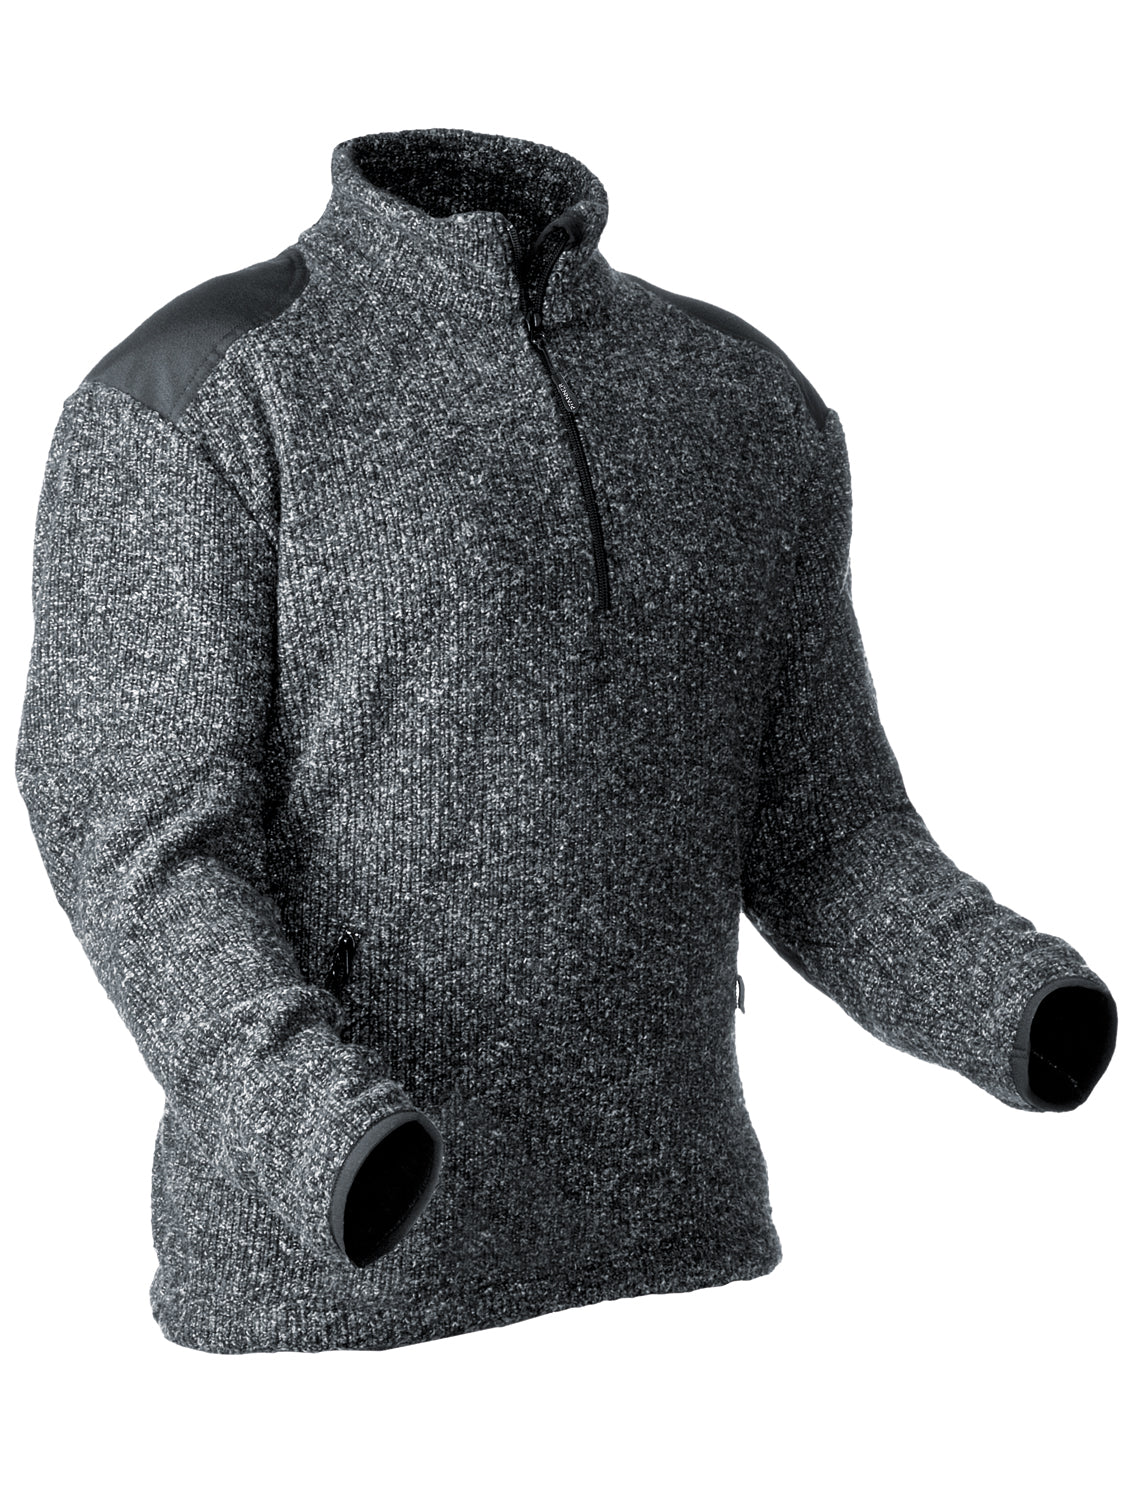 Pfanner Grizzly Sweater